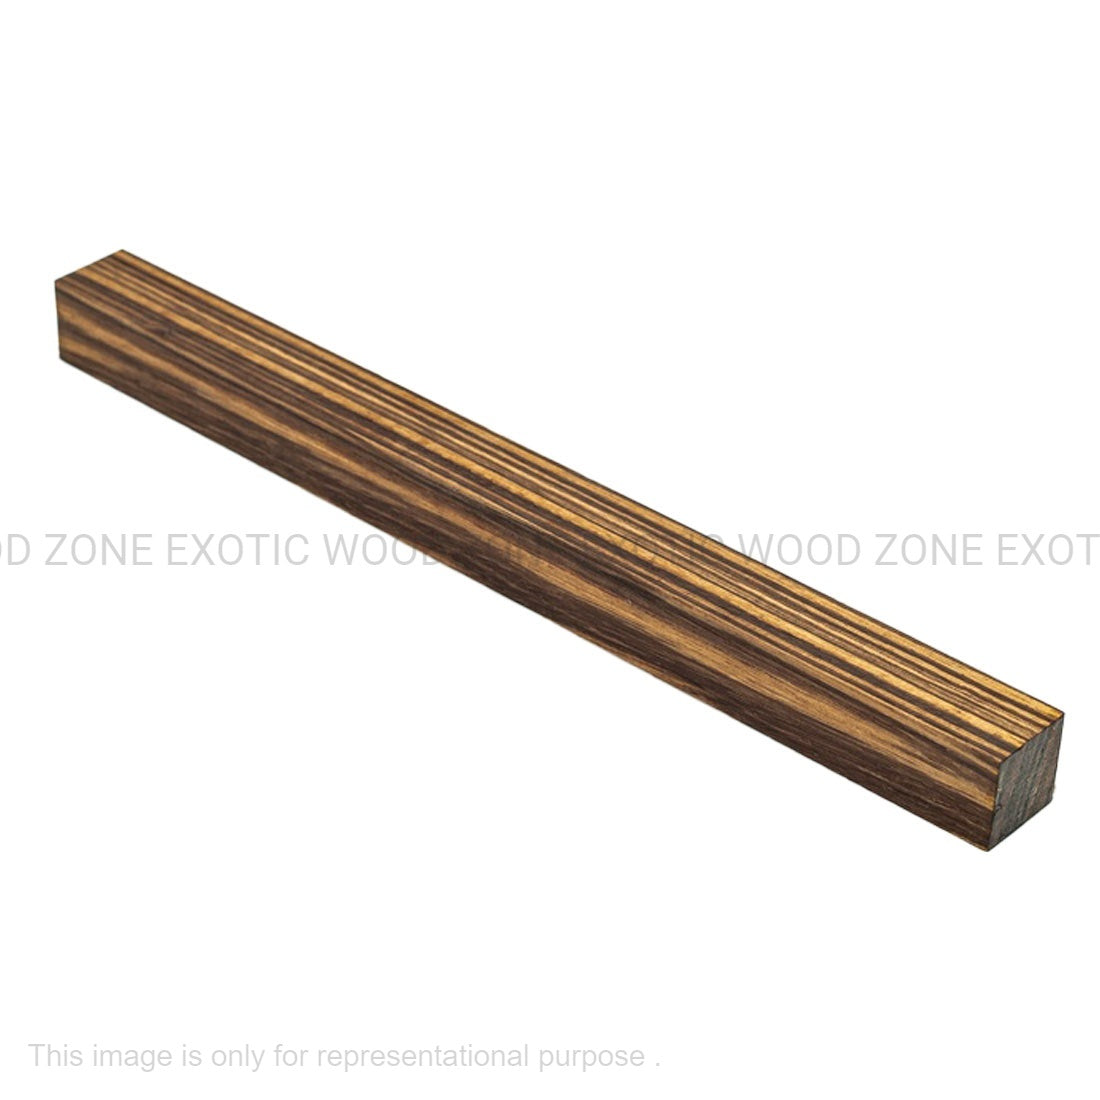 Zebrawood Hobbywood Blank 1&quot; x 1&quot; x 12&quot; inches